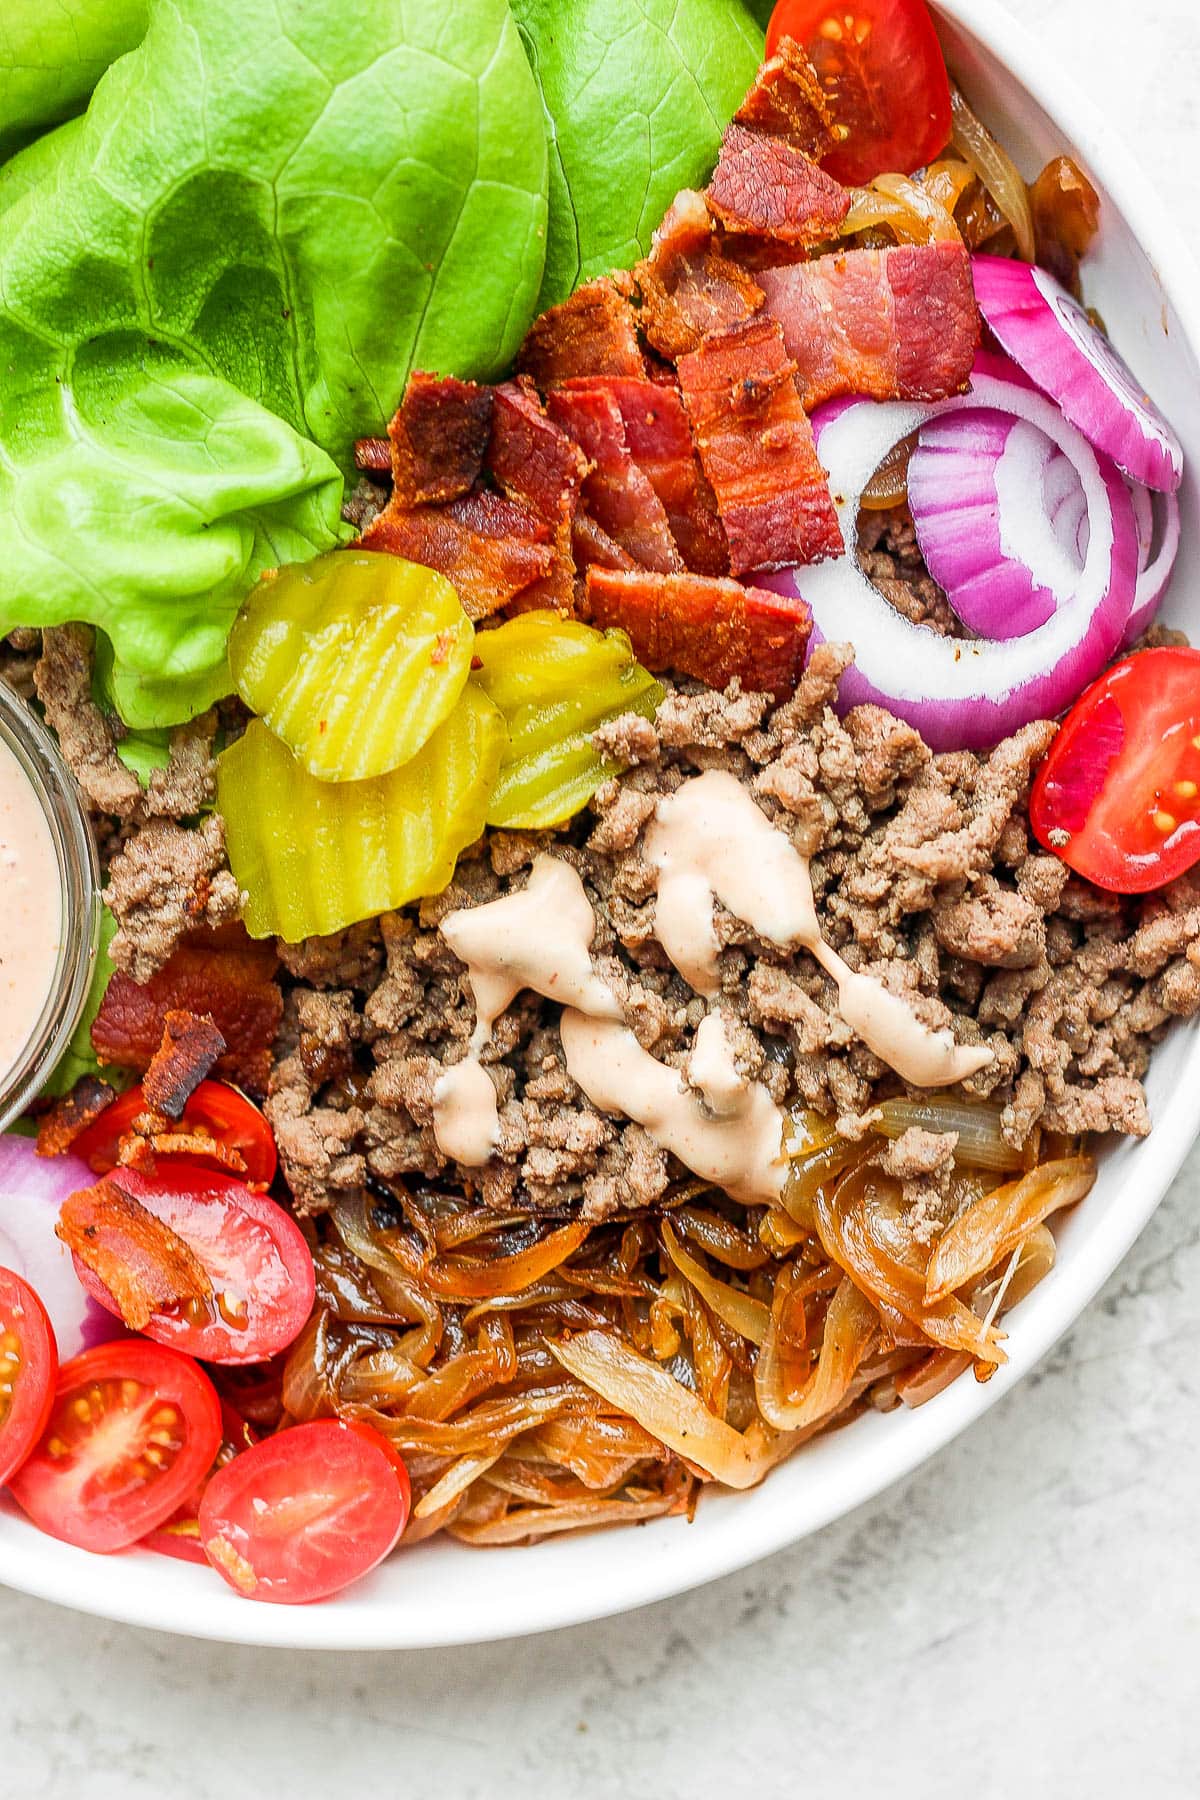 All burger bowl ingredients in a bowl with a small dish of burger sauce.